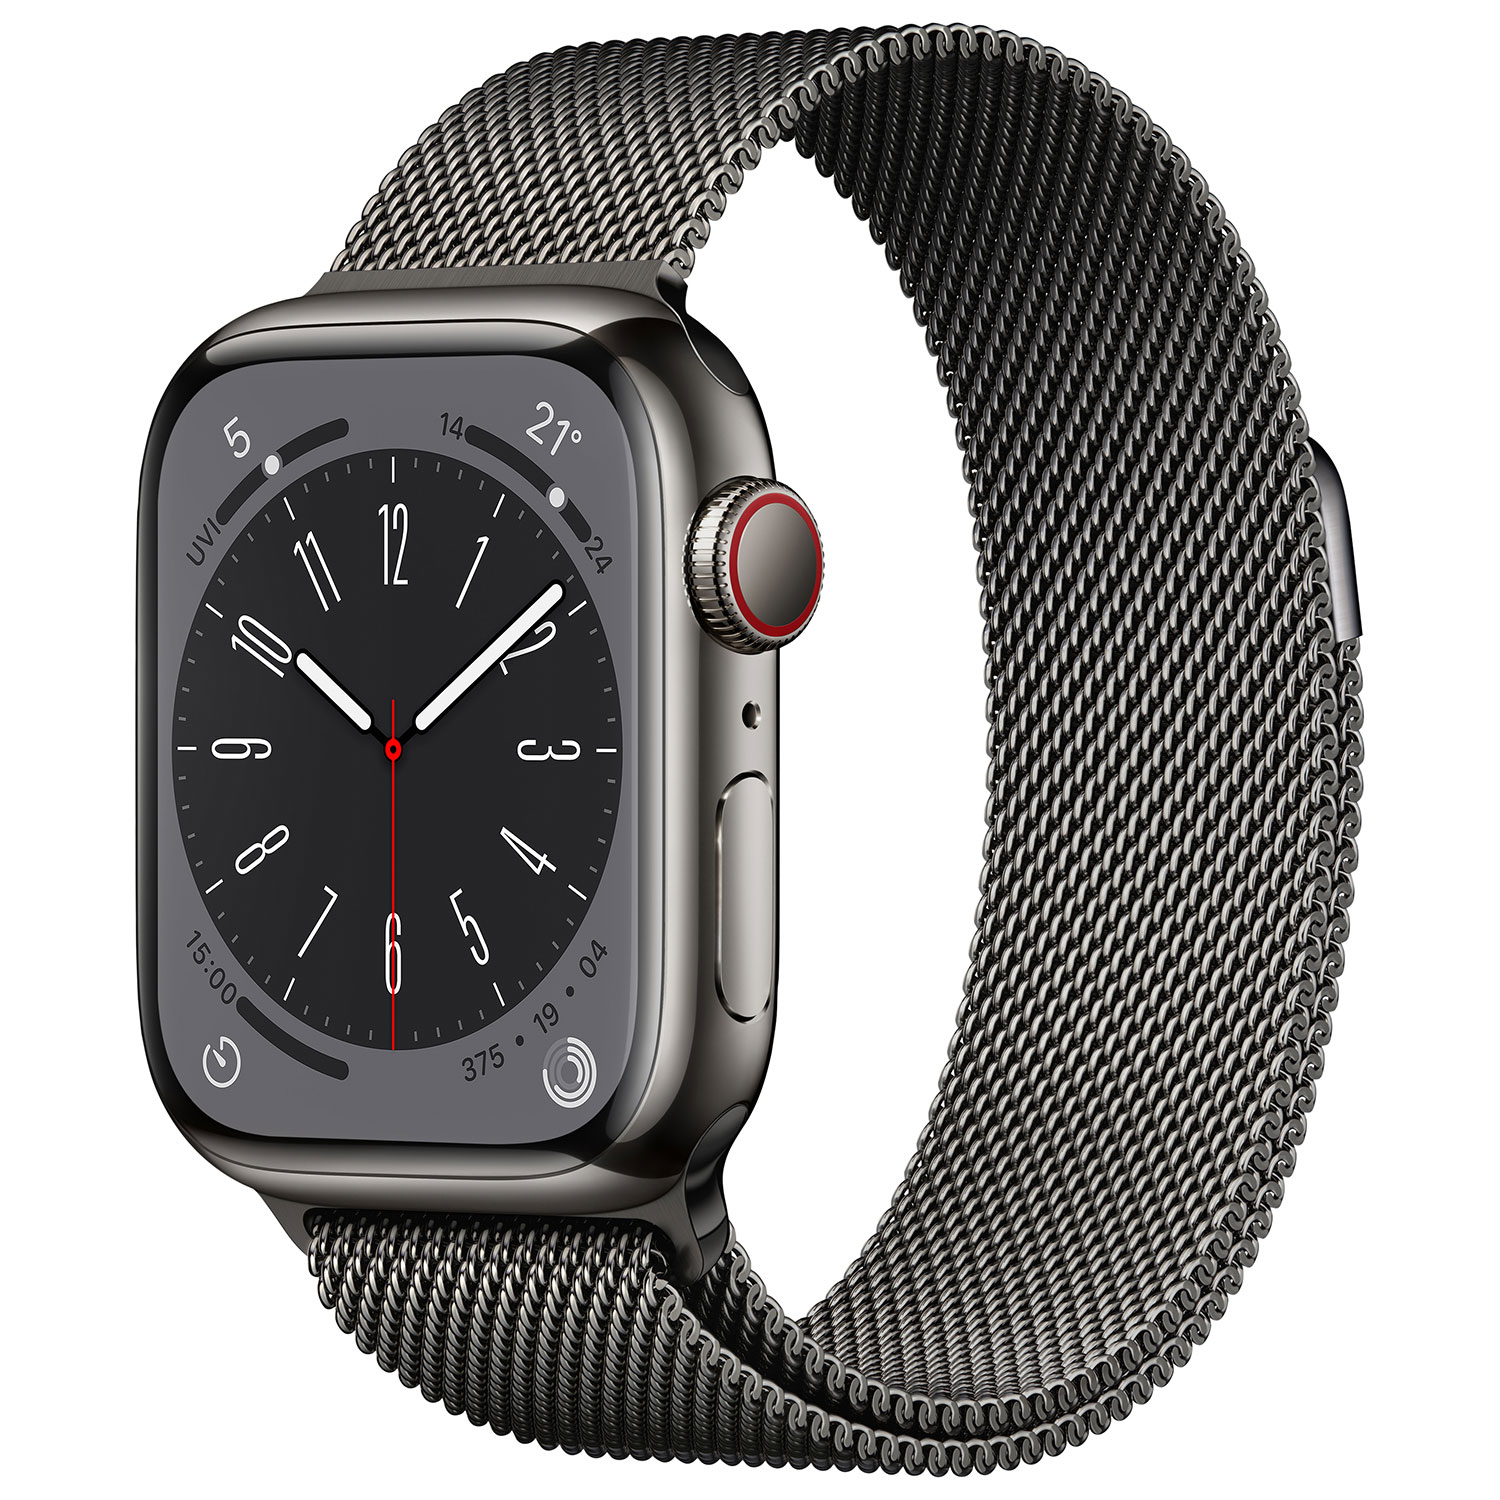 TELUS Apple Watch Series 8 (GPS + Cellular) 41mm Graphite Stainless Steel Case w/ Graphite Milanese Loop - S/M - Monthly Financing